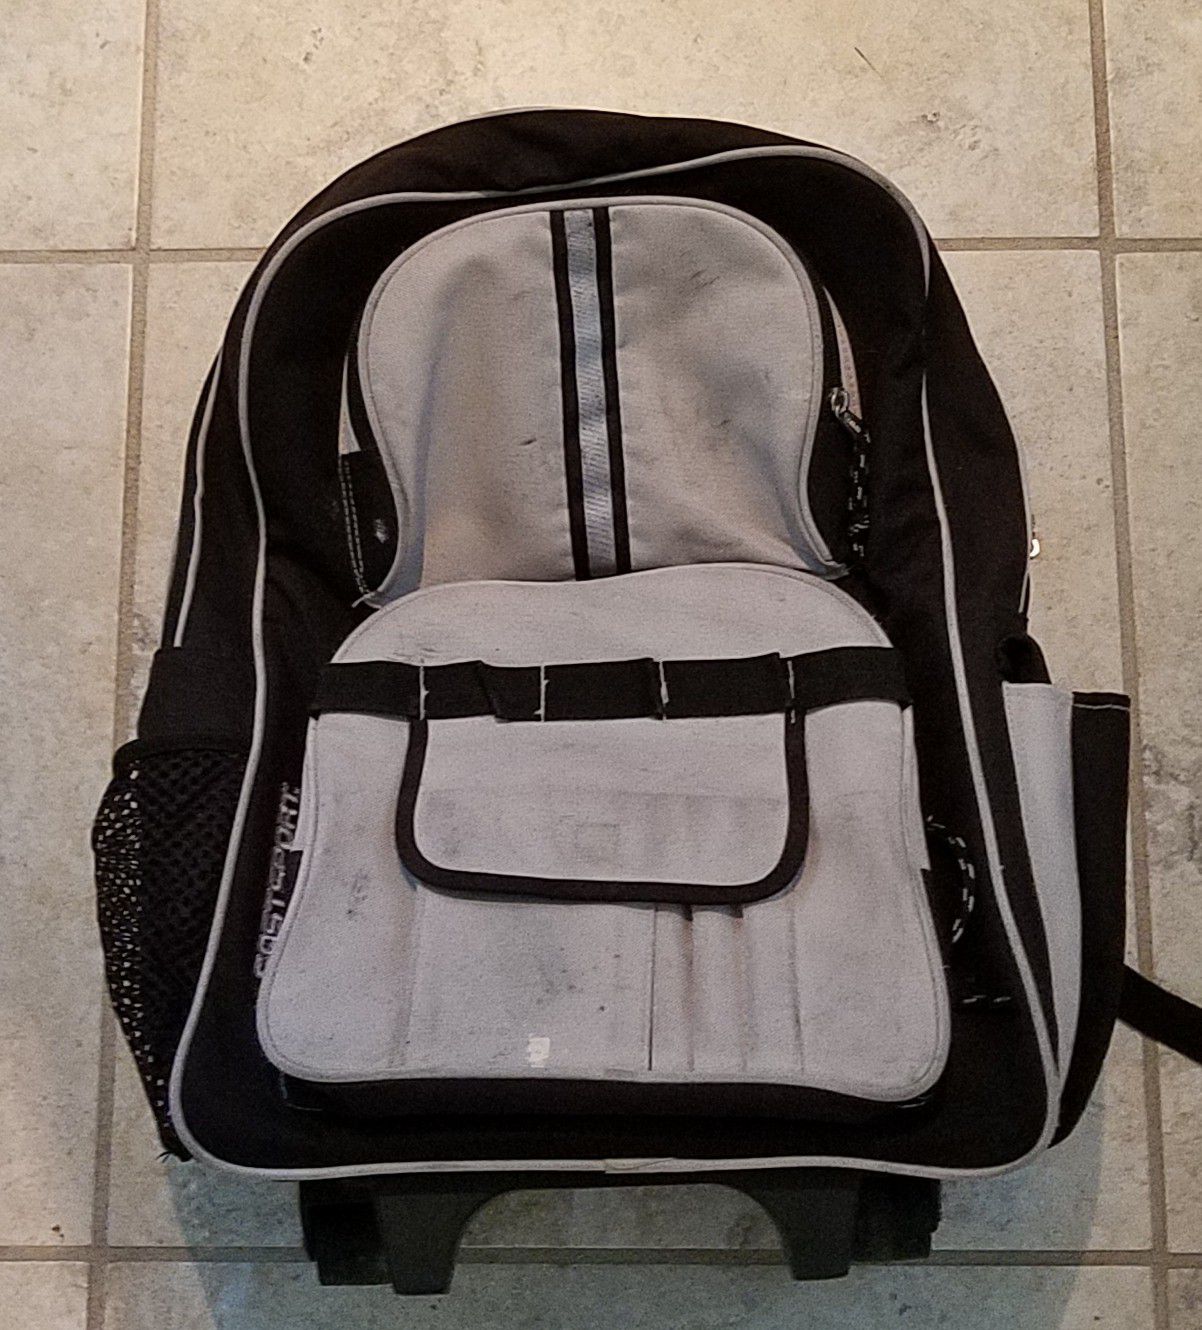 Fully functional travel backpack with wheels